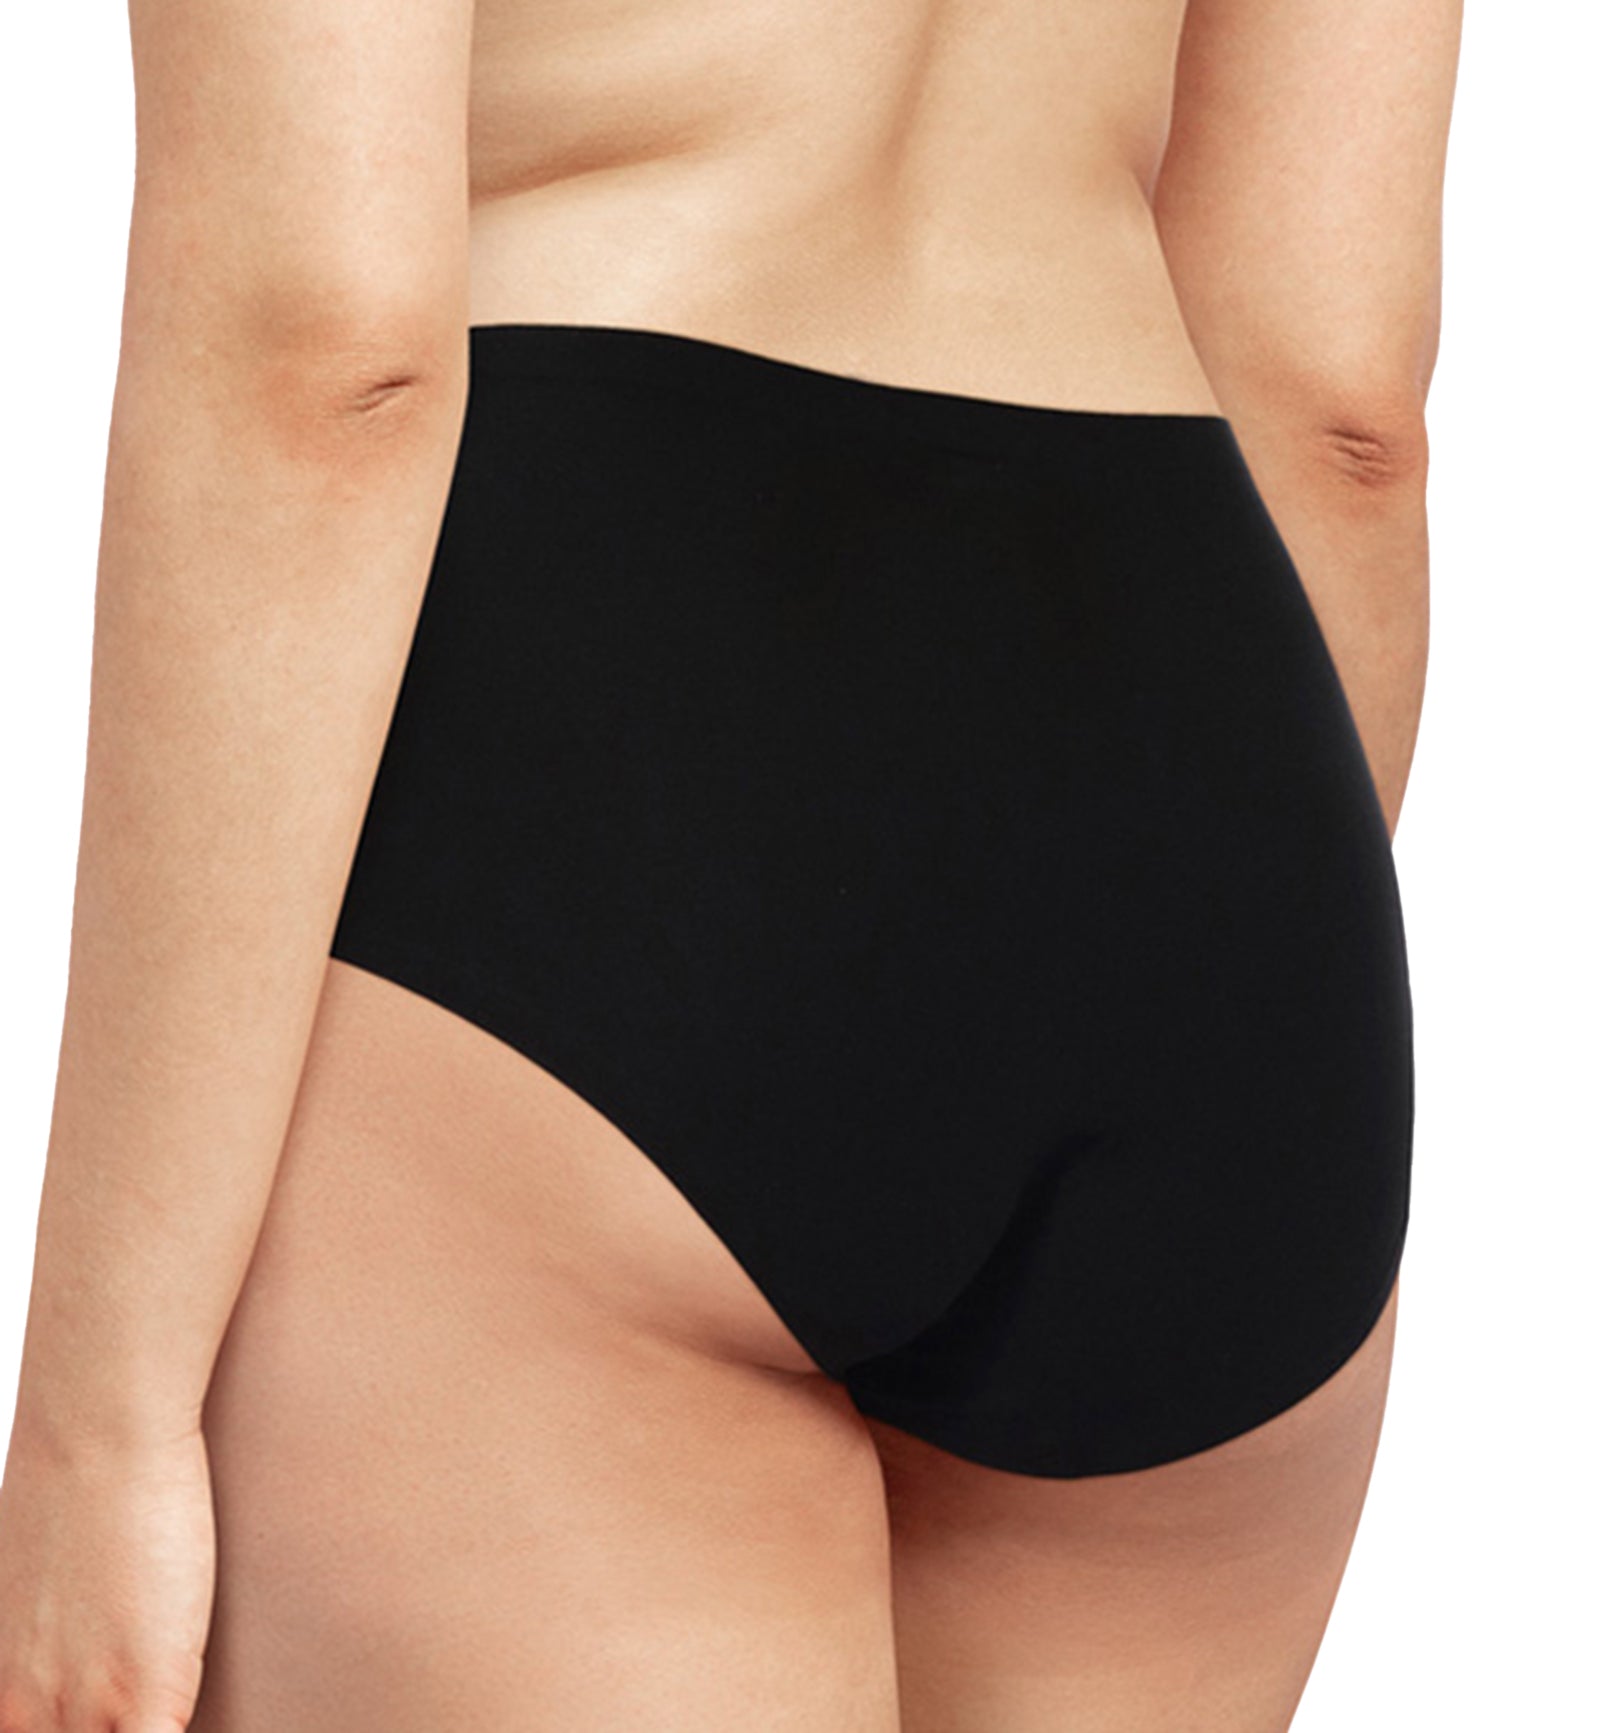 Chantelle Softstretch Plus-Size Full Brief (C11370),Black - Black,One Size